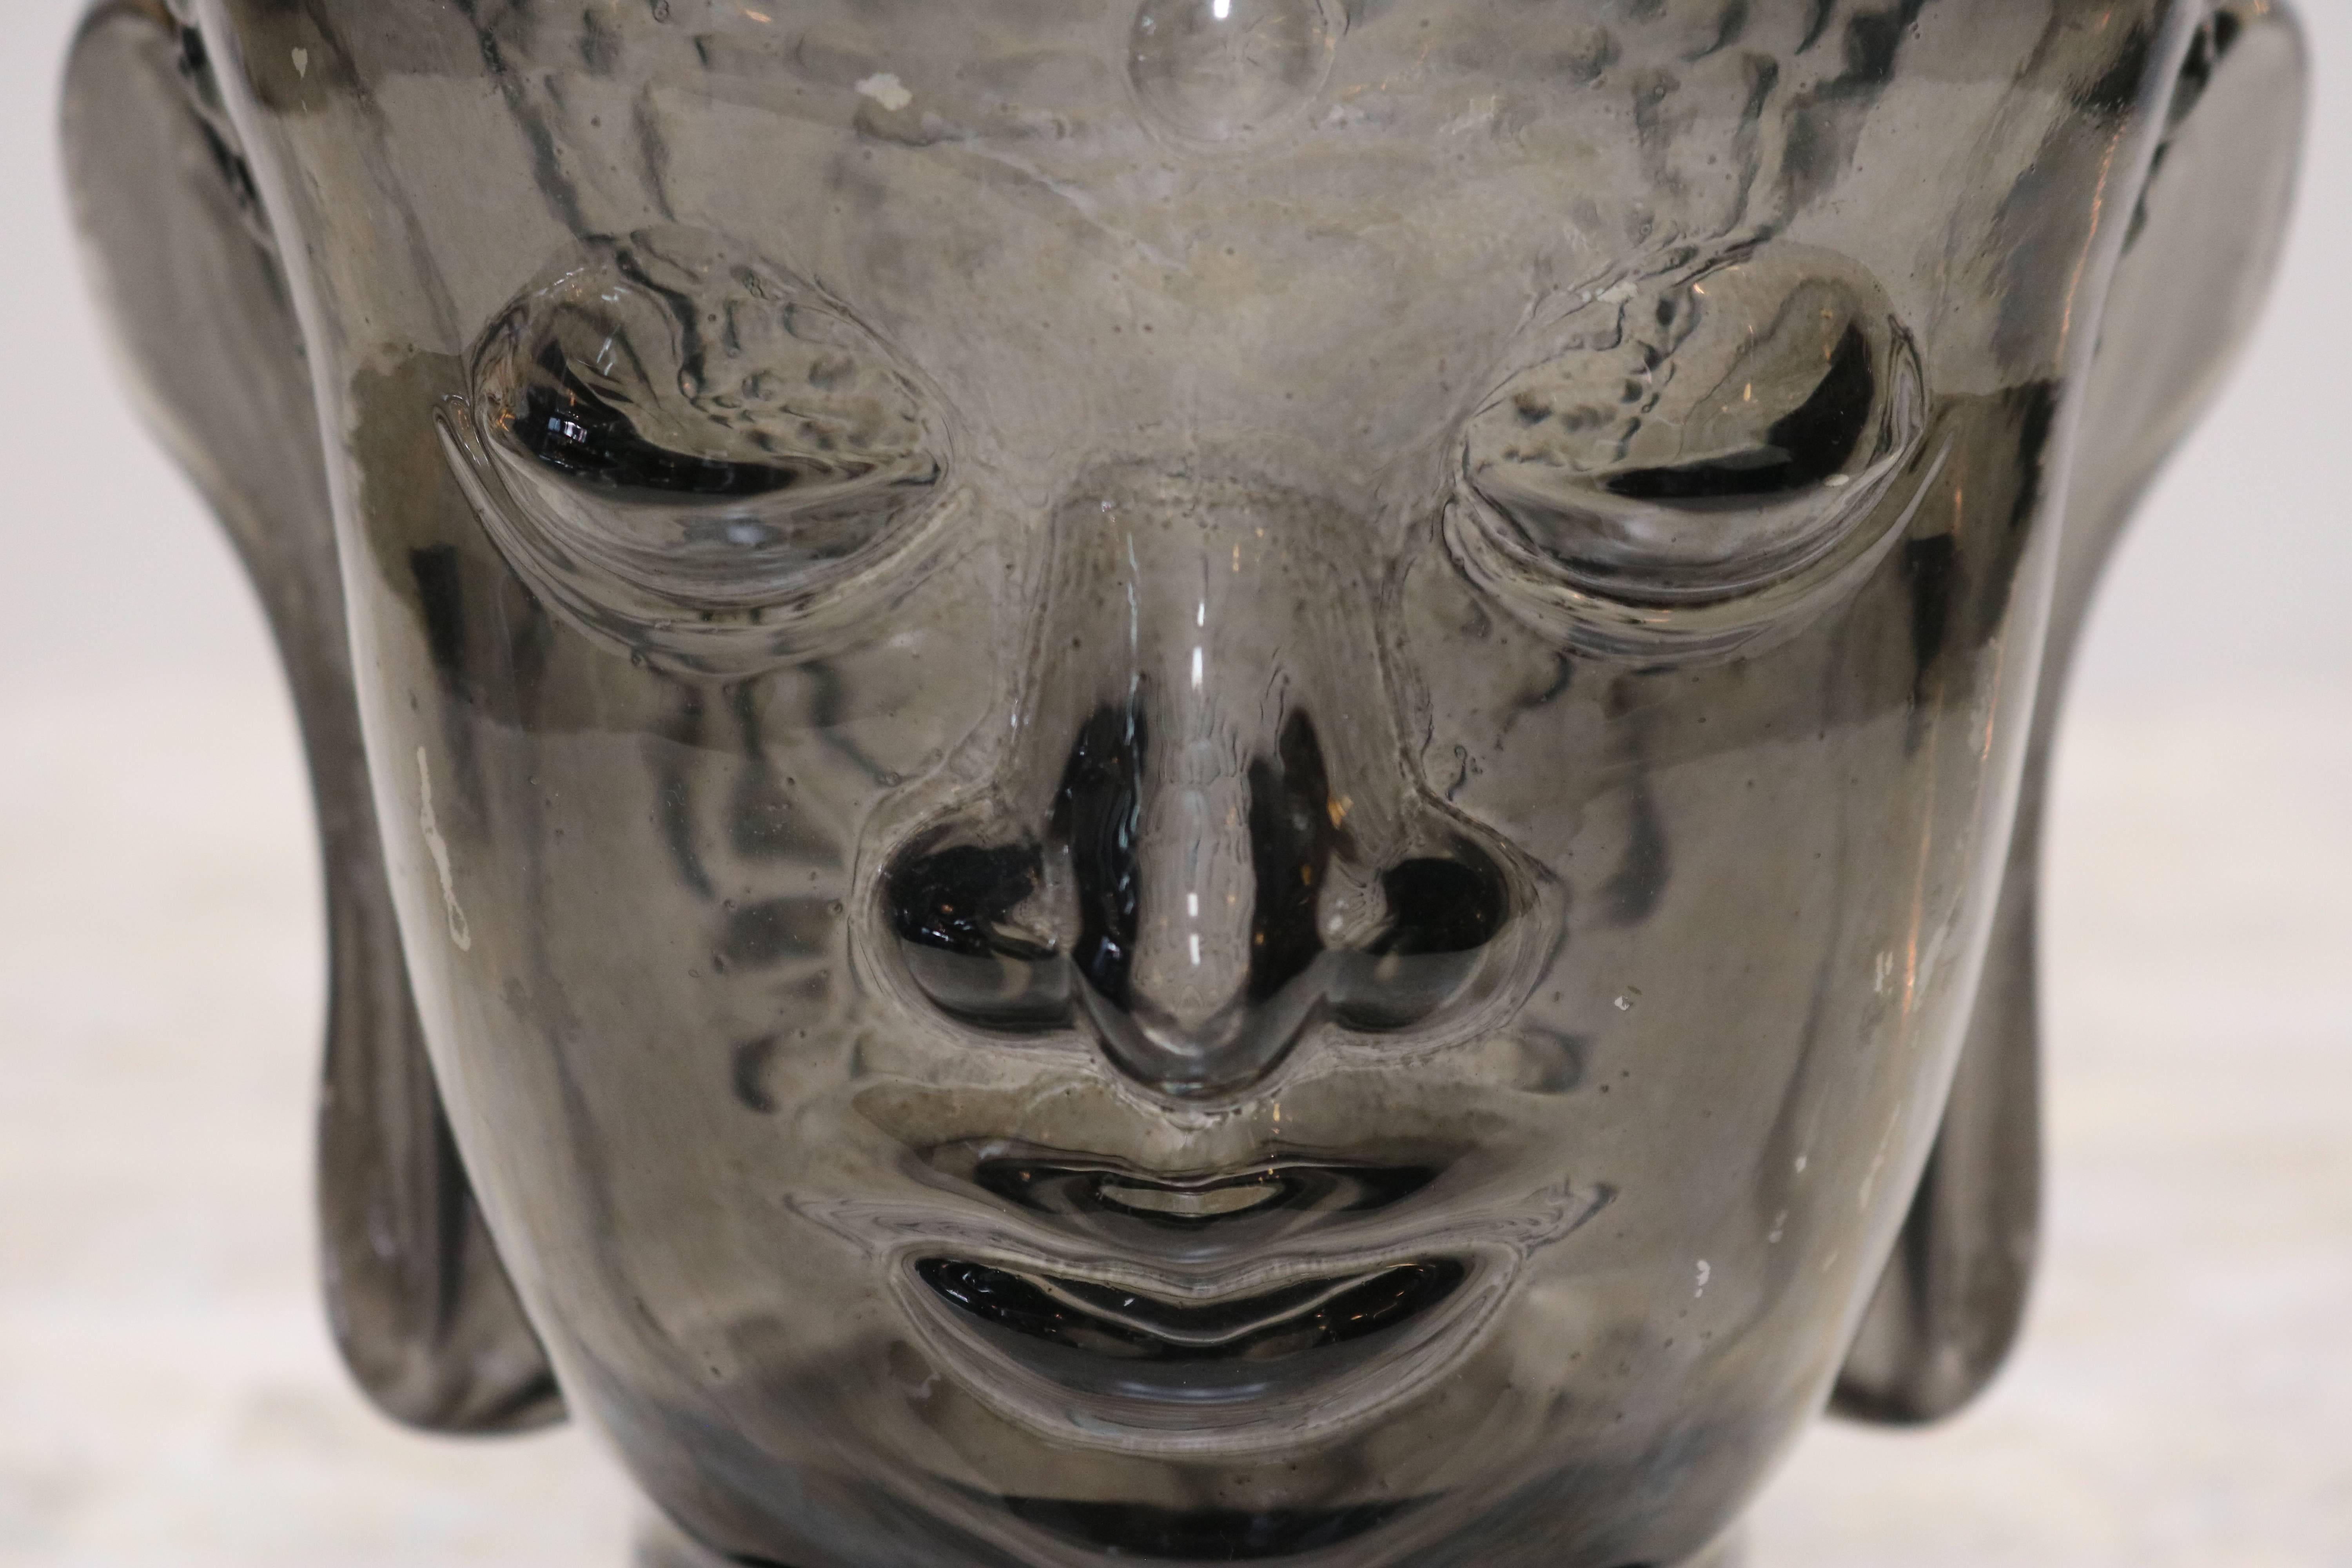 Smoked glass Buddha head decorative piece is hollow and has a black base.
Measures: Bottom base is 4.0